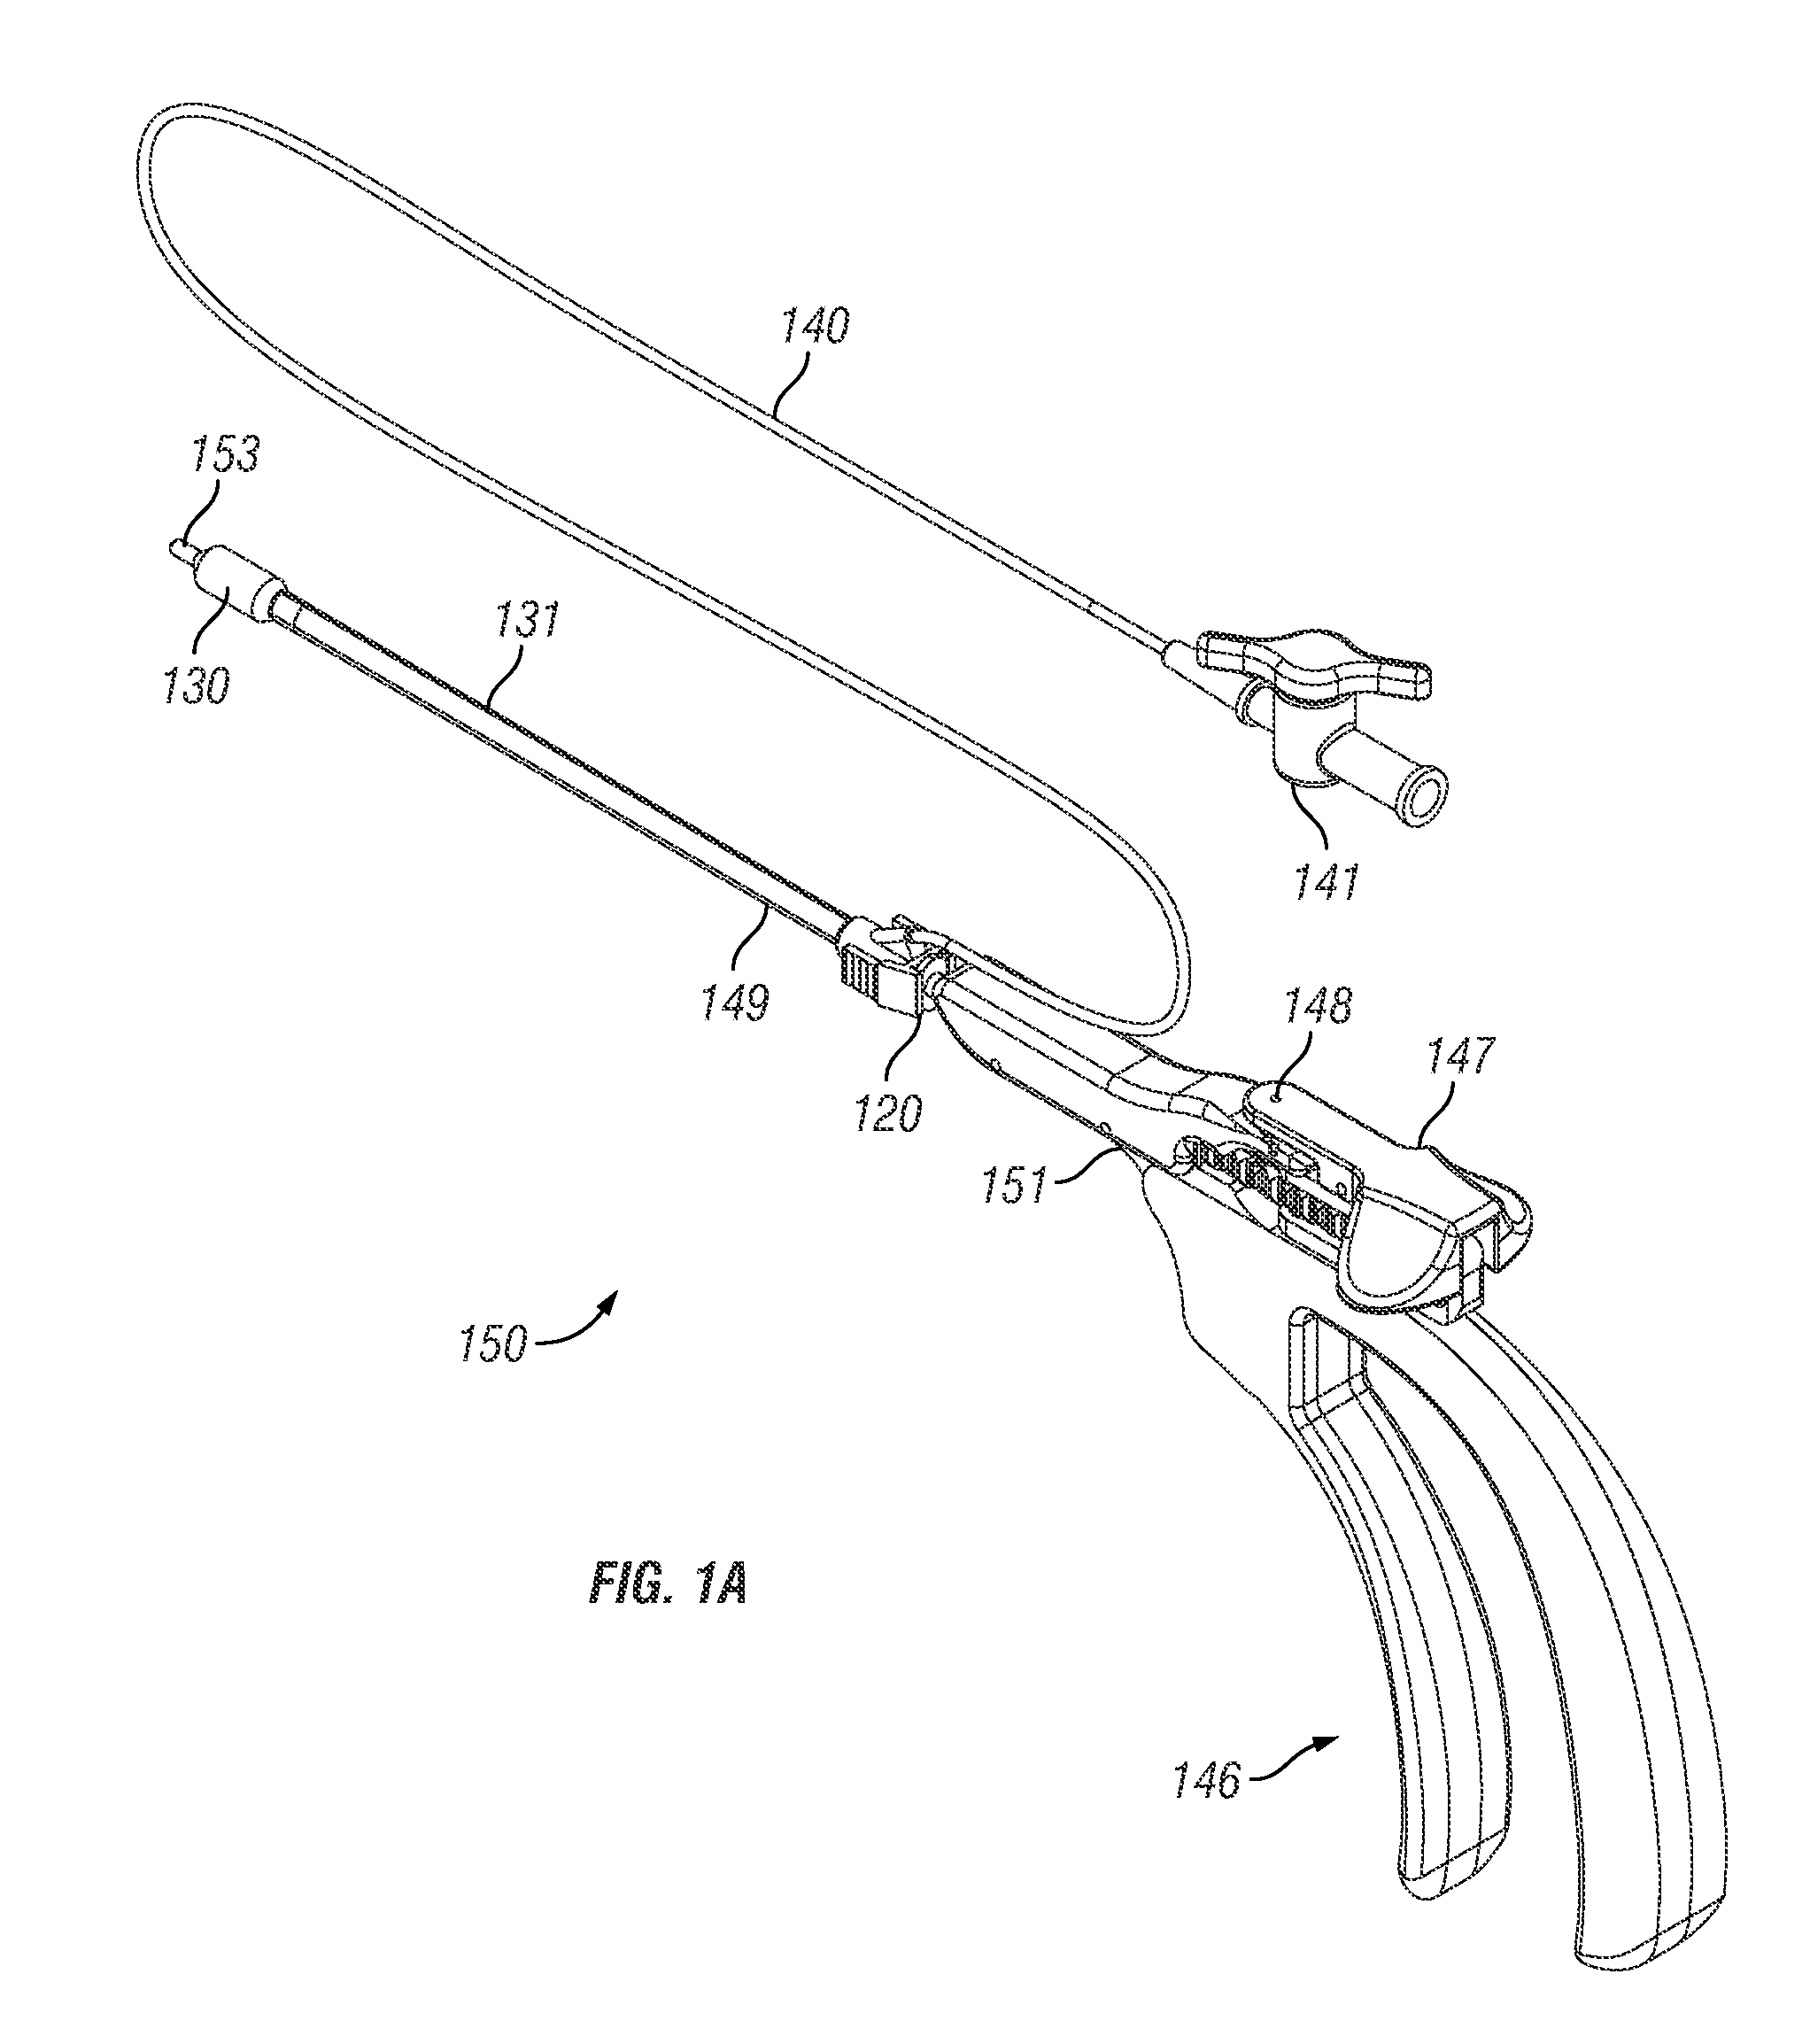 Systems, devices and methods for providing therapy to an anatomical structure